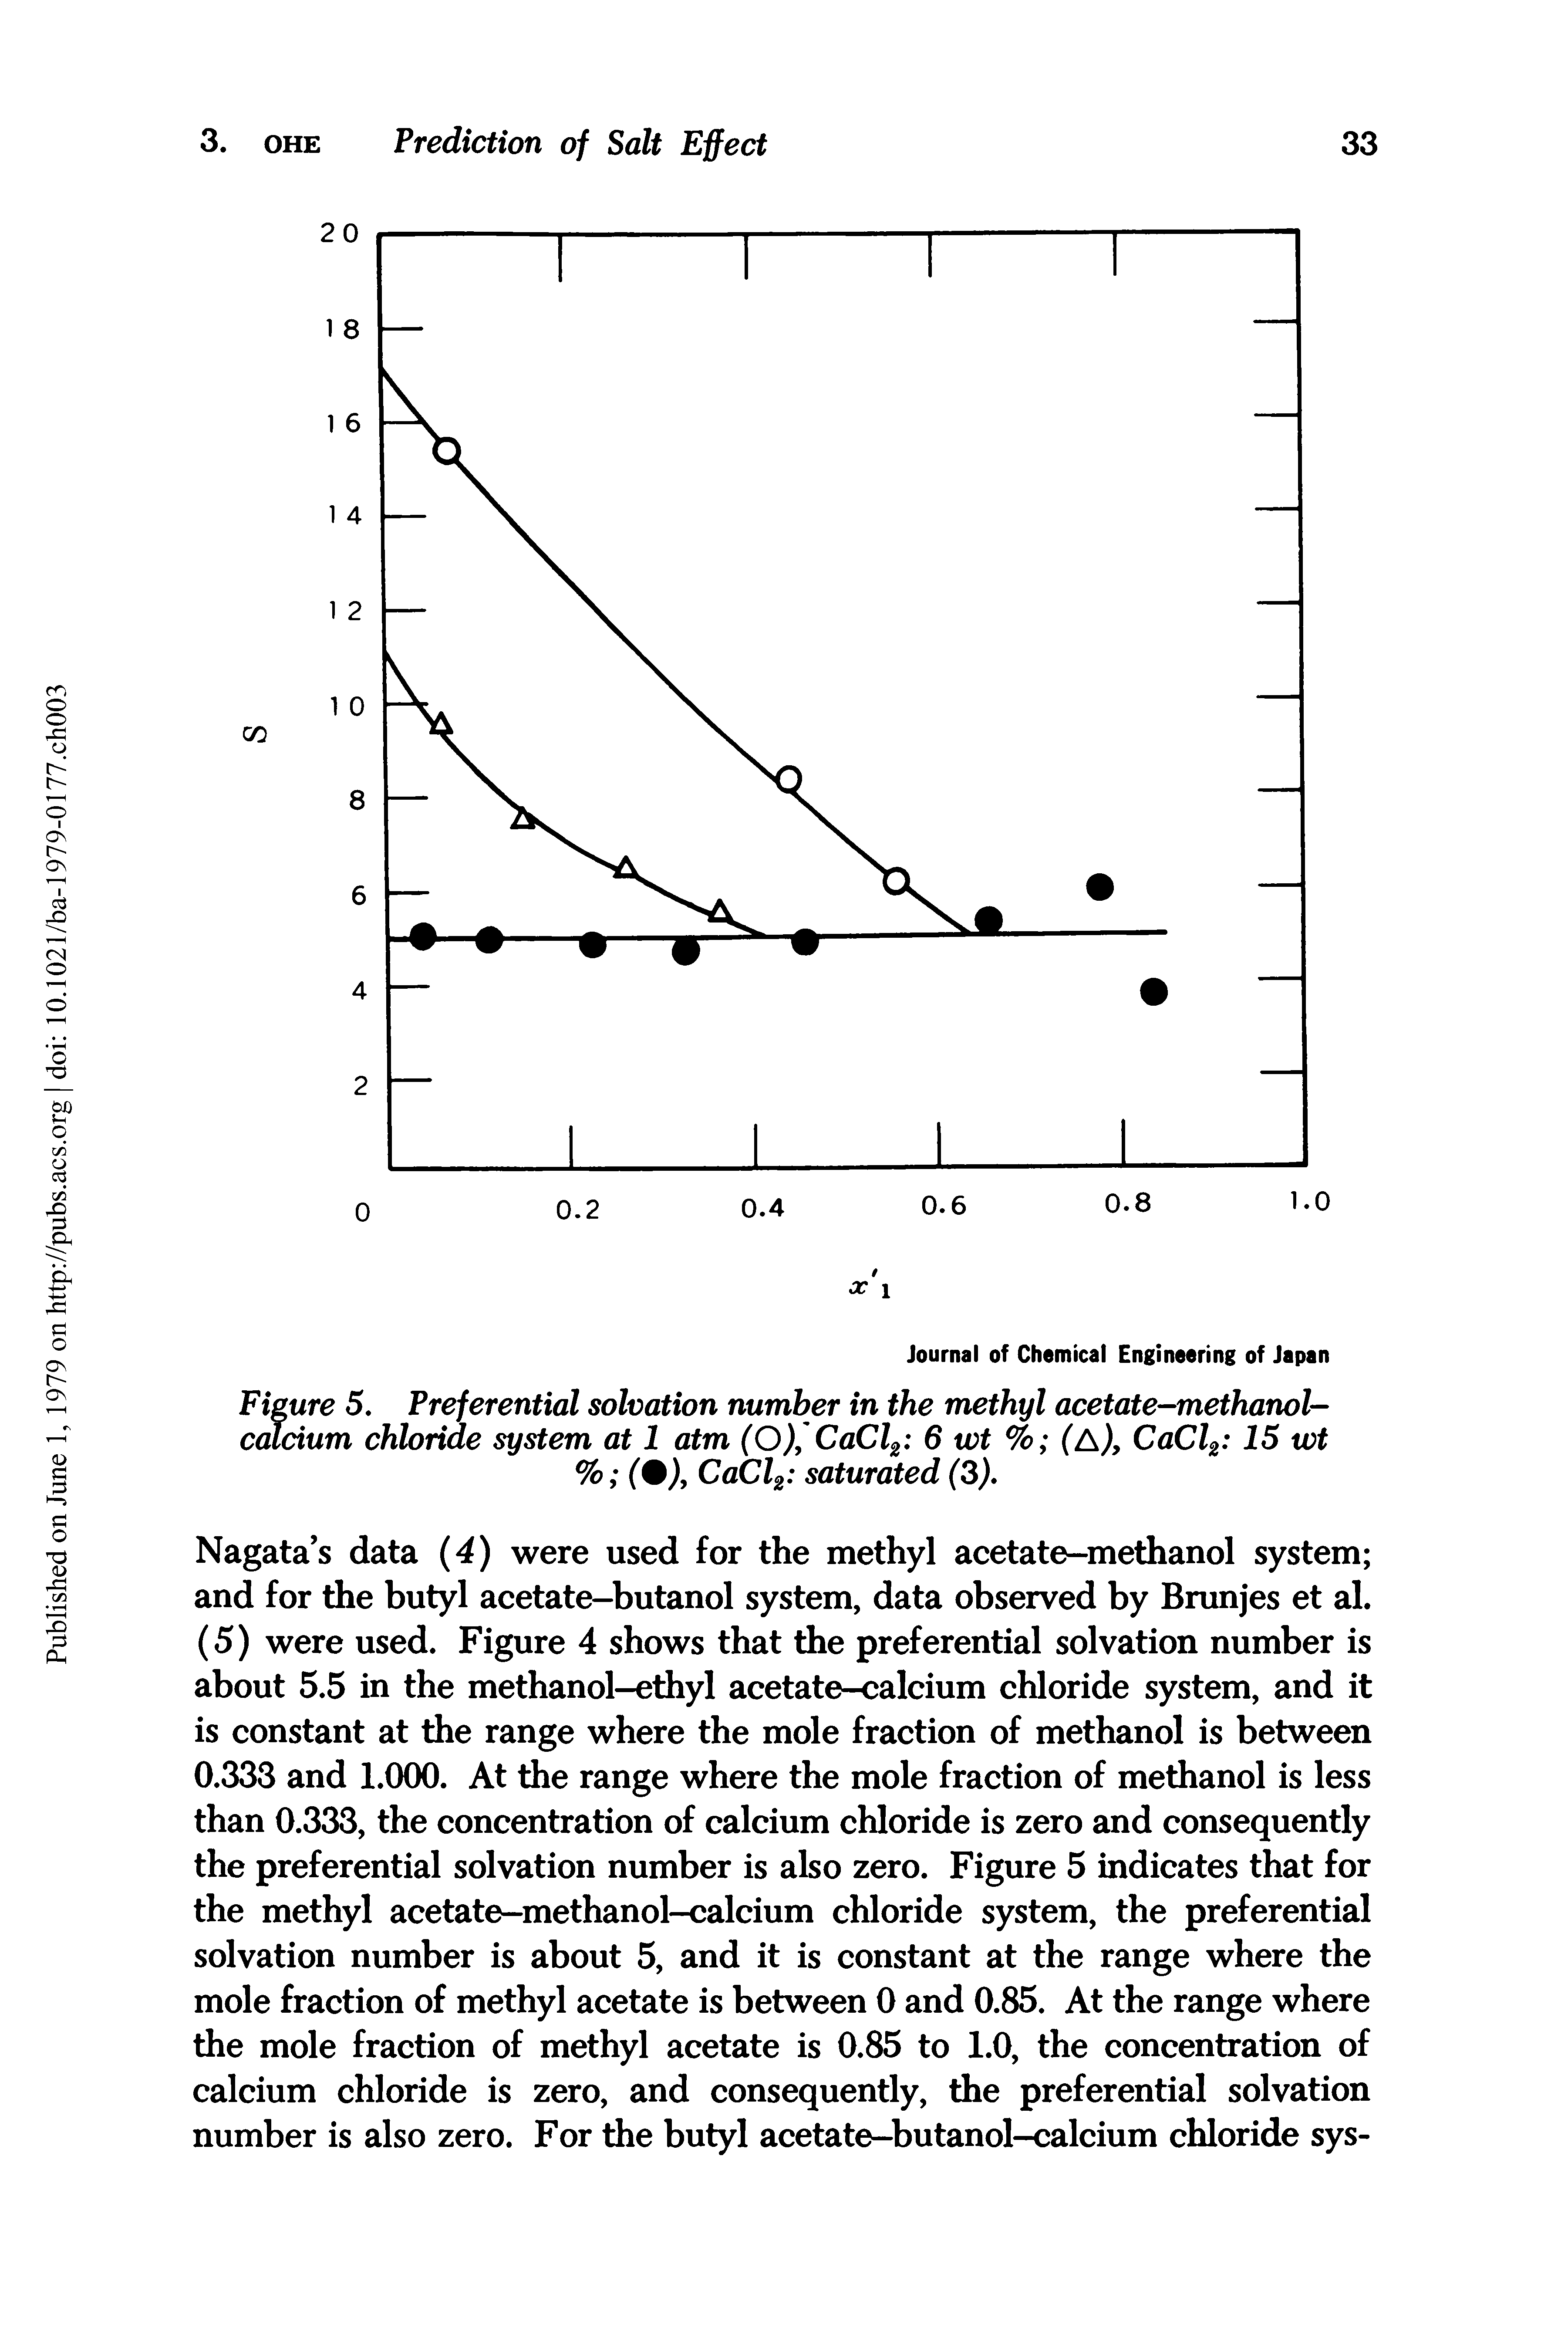 Figure 5. Preferential solvation number in the methyl acetate-methanol-calcium chloride system at 1 atm (O), CaCl2 6 tot % (A), CaCl2 15 wt % (0), CaCl2 saturated (5).